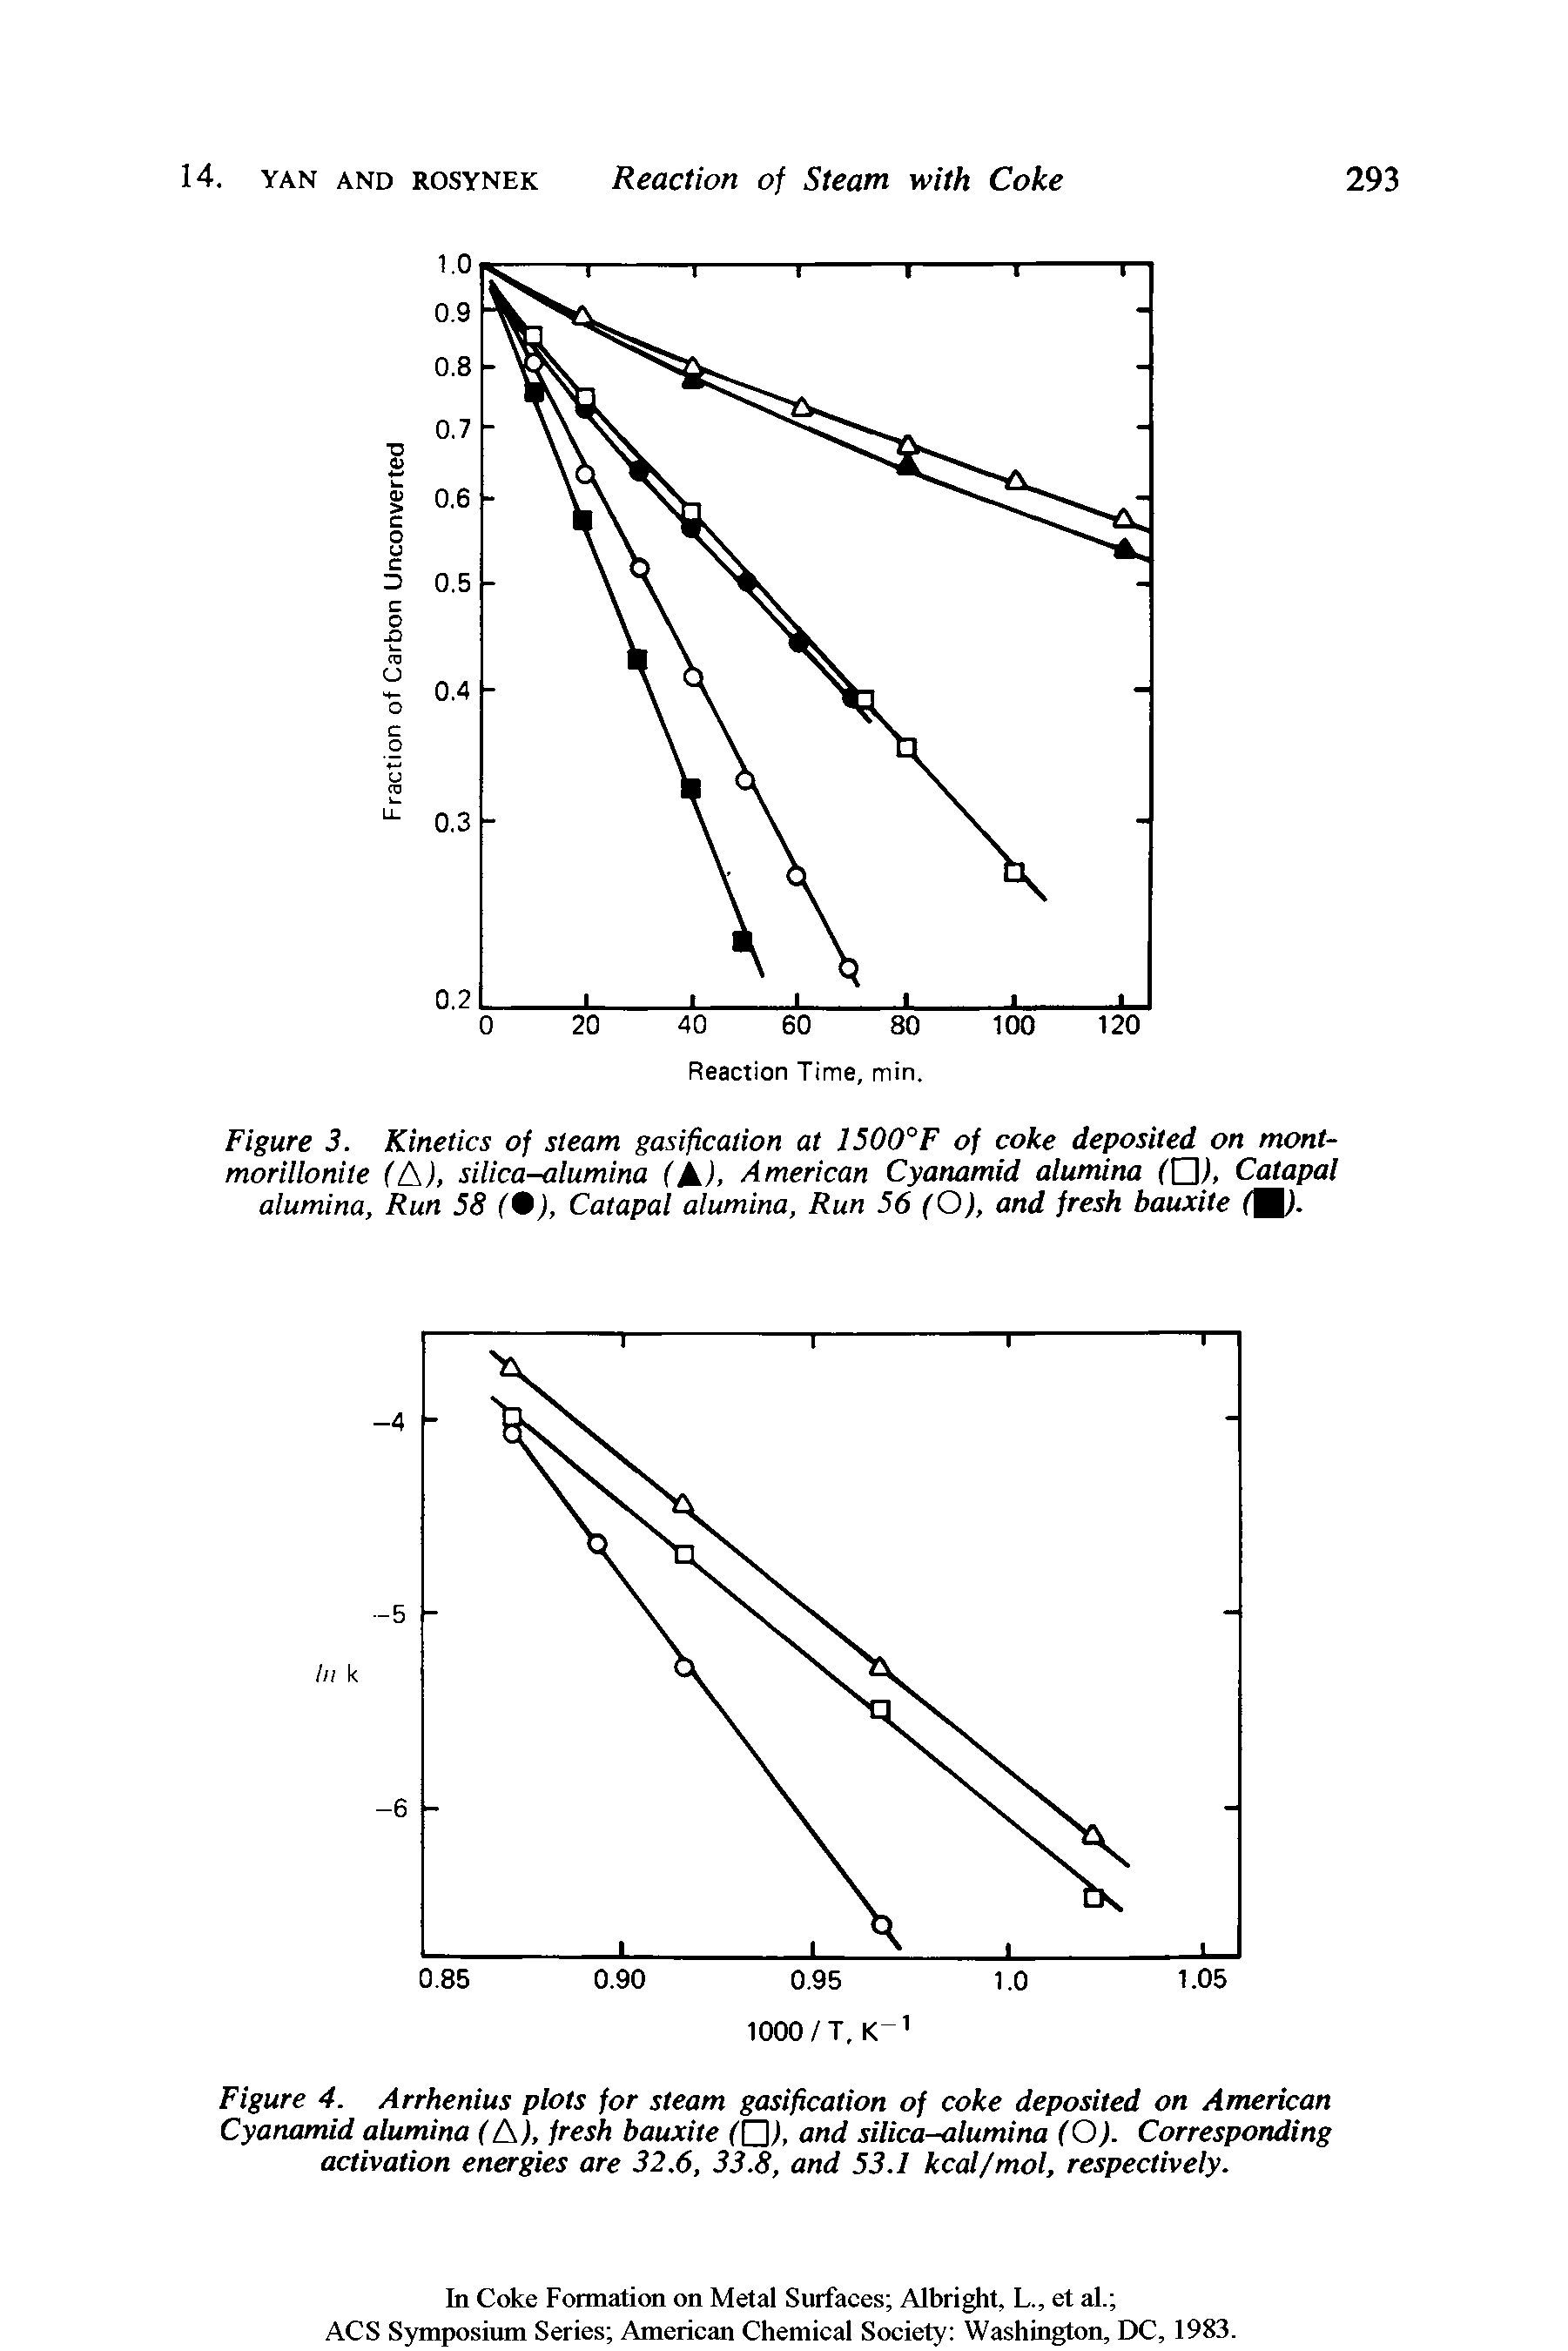 Figure 4. Arrhenius plots for steam gasification of coke deposited on American Cyanamid alumina (A), fresh bauxite (O. and silica-alumina (O). Corresponding activation energies are 32.6, 33.8, and 53.1 kcal/mol, respectively.